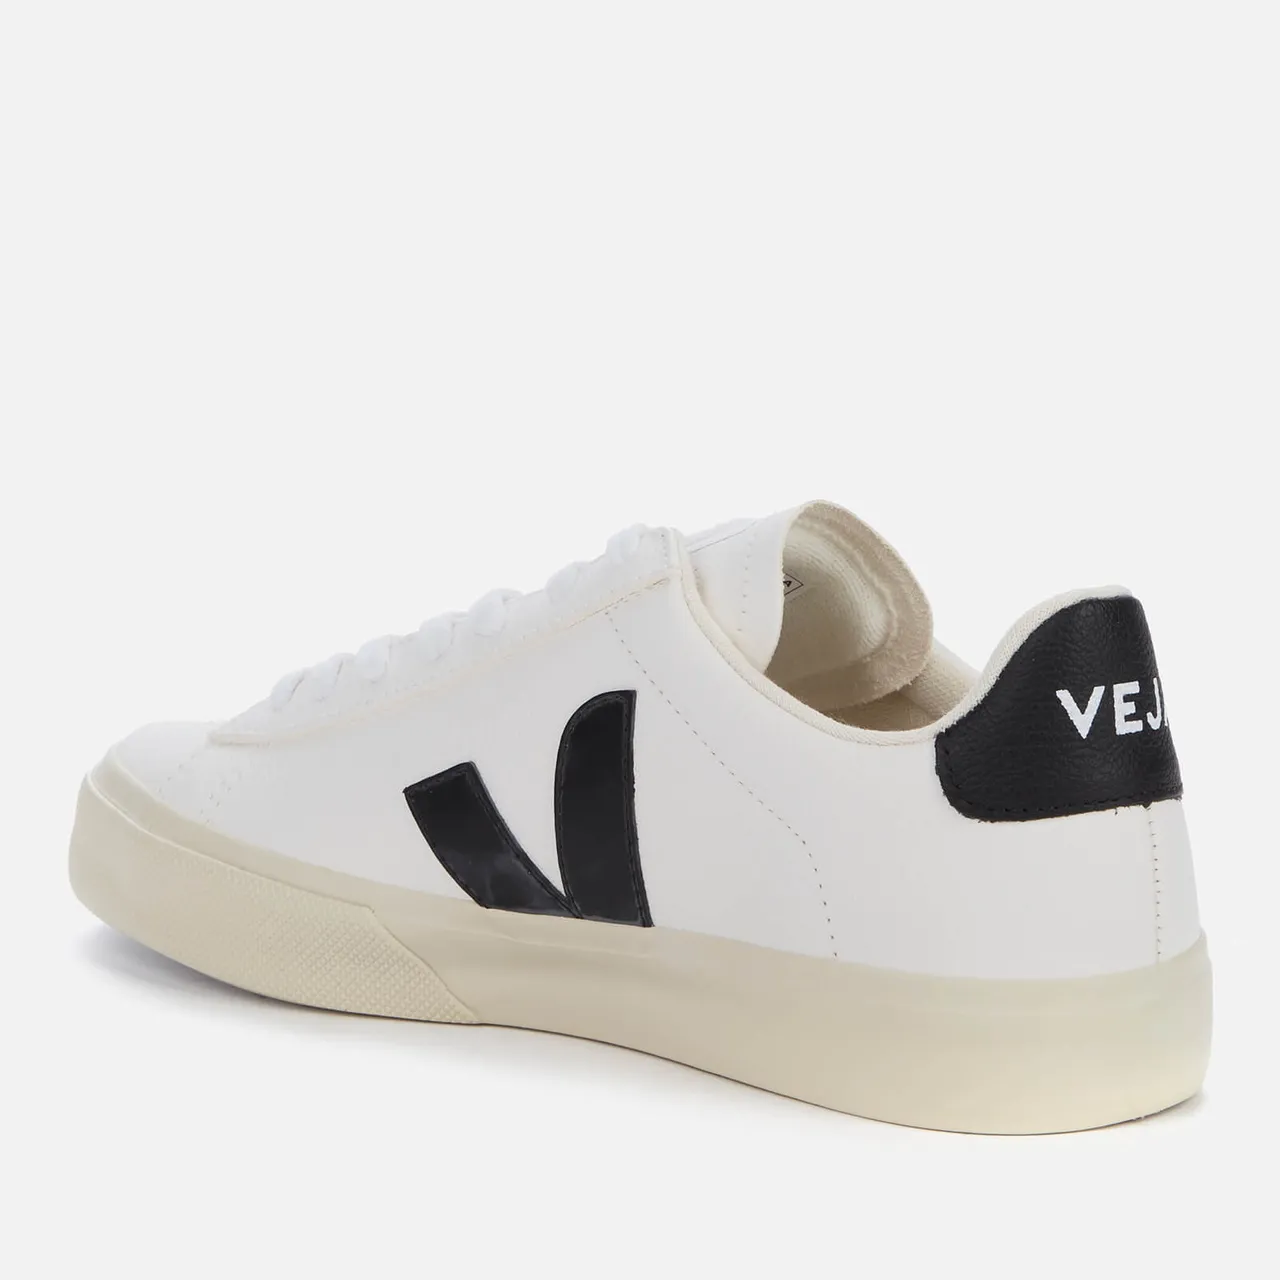 Veja Women's Campo Chrome Free Leather Trainers - Extra White/Black - UK